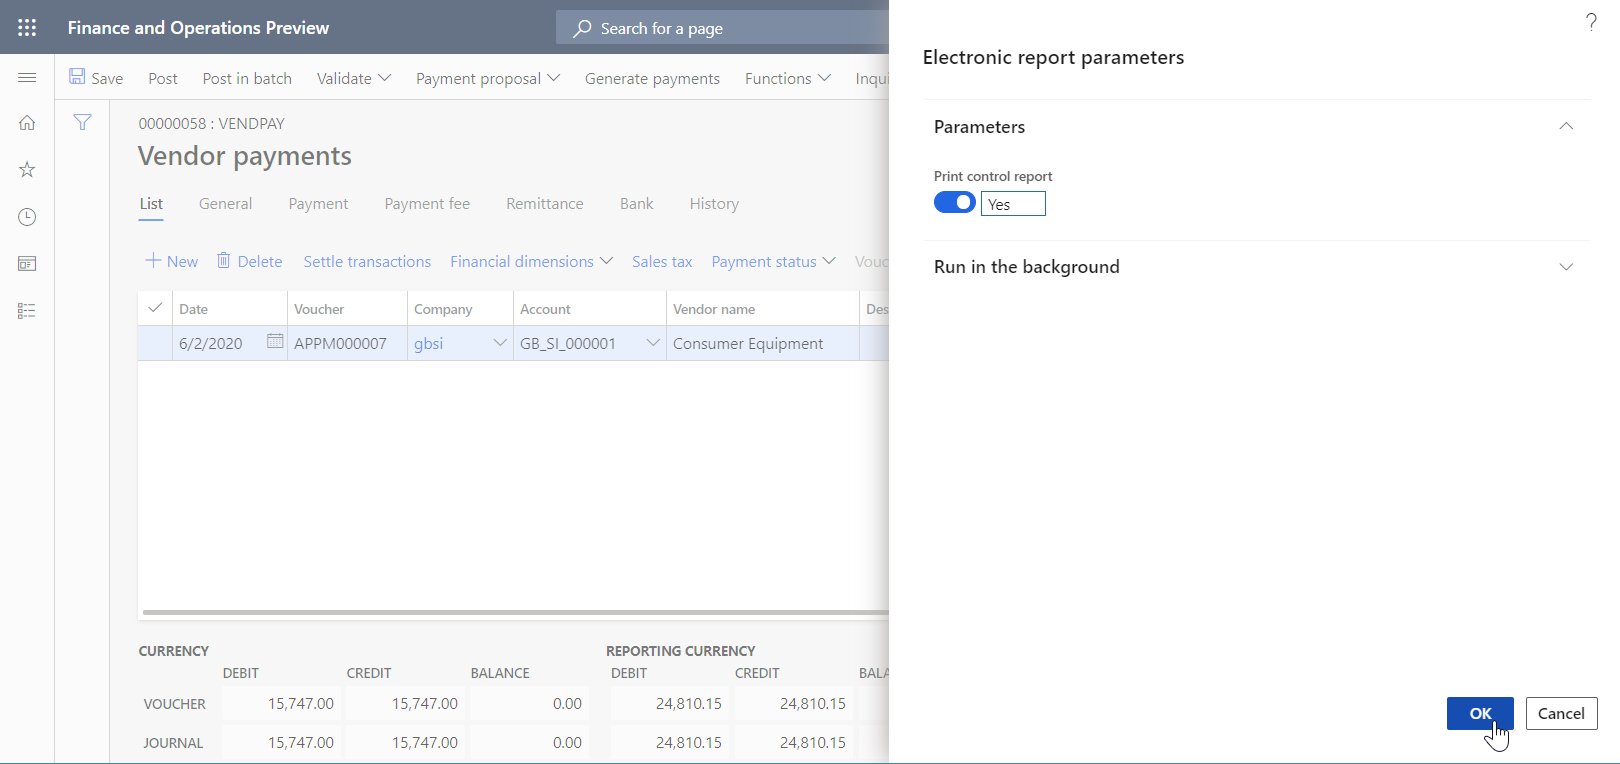 Electronic report parameters dialog page.